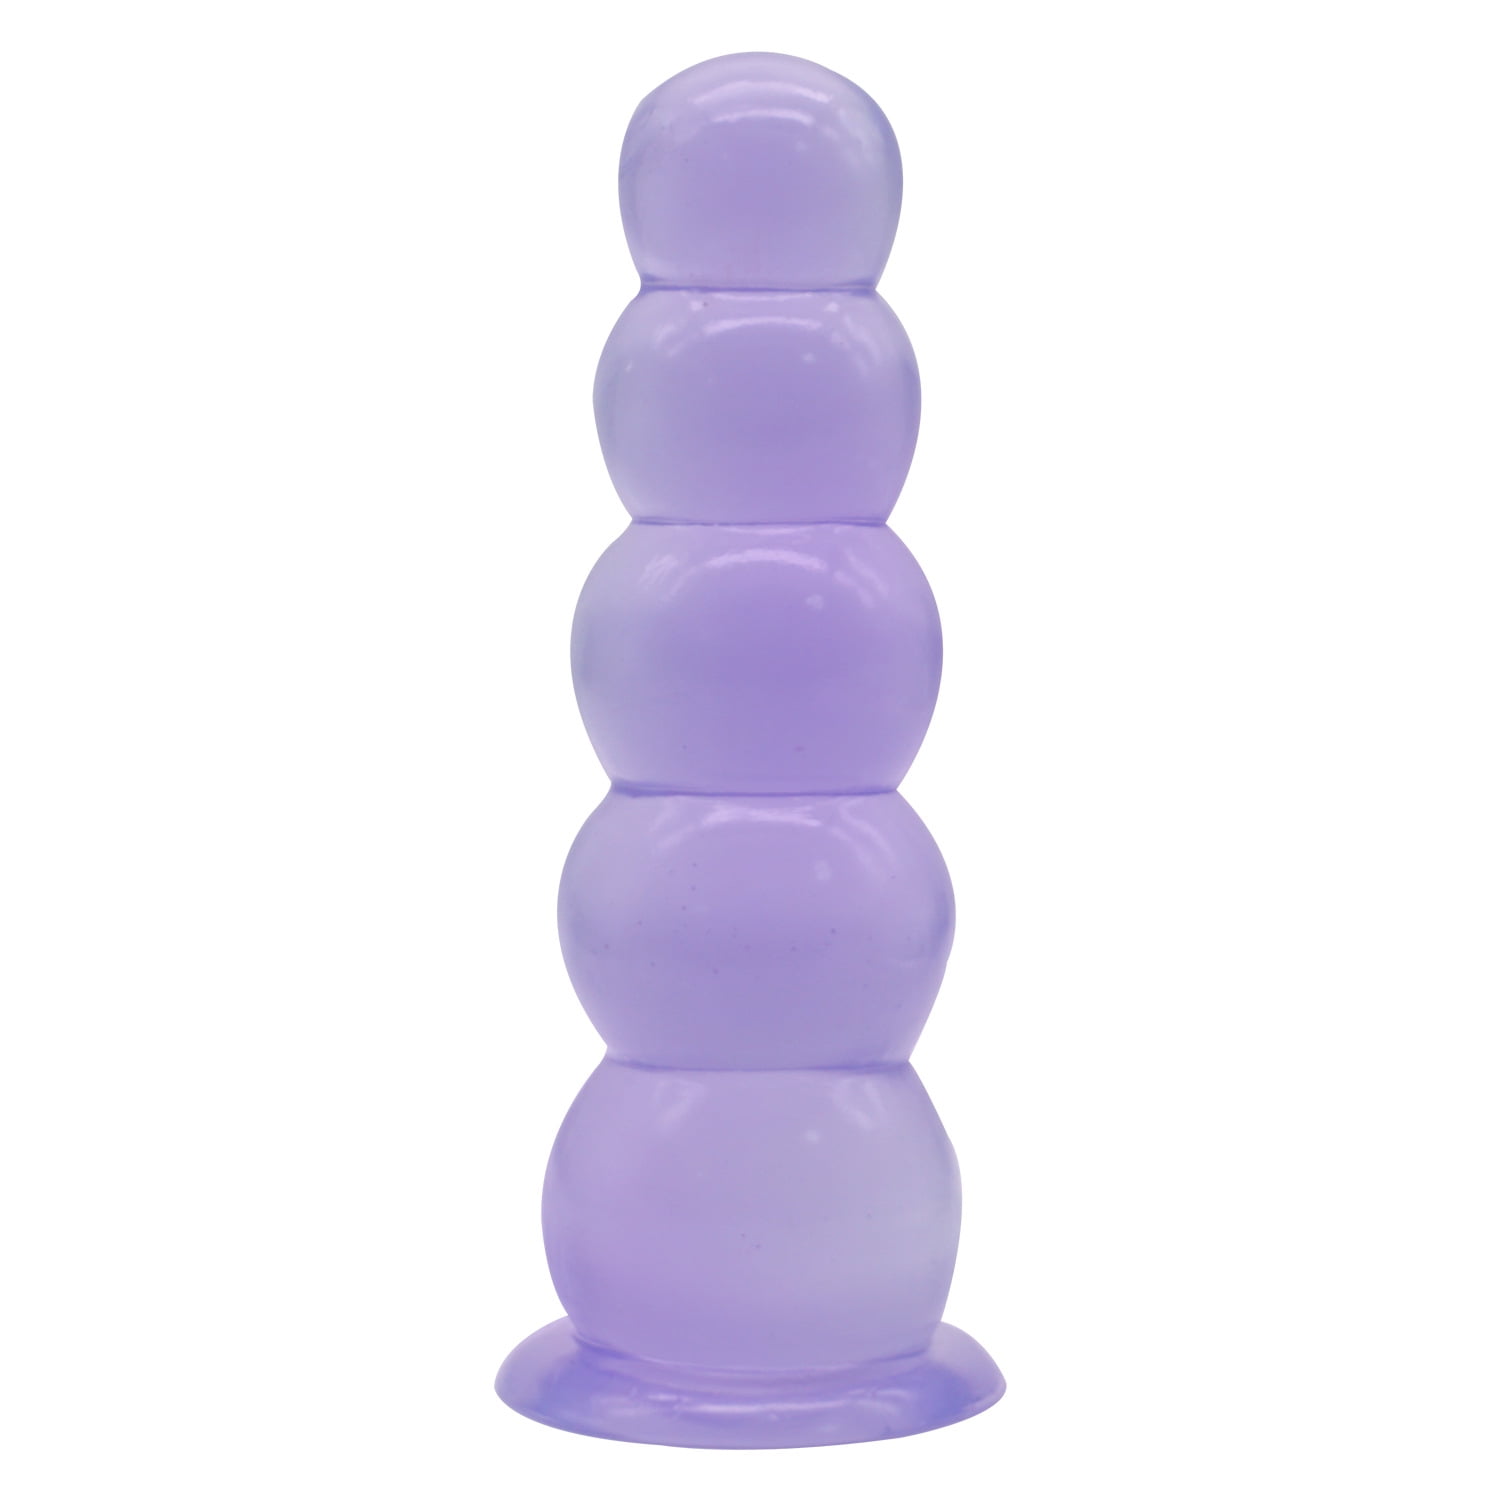 Portable Prostate Massagers Beads Design Silicone Anal Sex Trainer Male Female Sex Adult Toys for Couples Men Women Beginners Advanced Users Solo Pleasure Anus Butt Plug Anal Sex Toys Purple